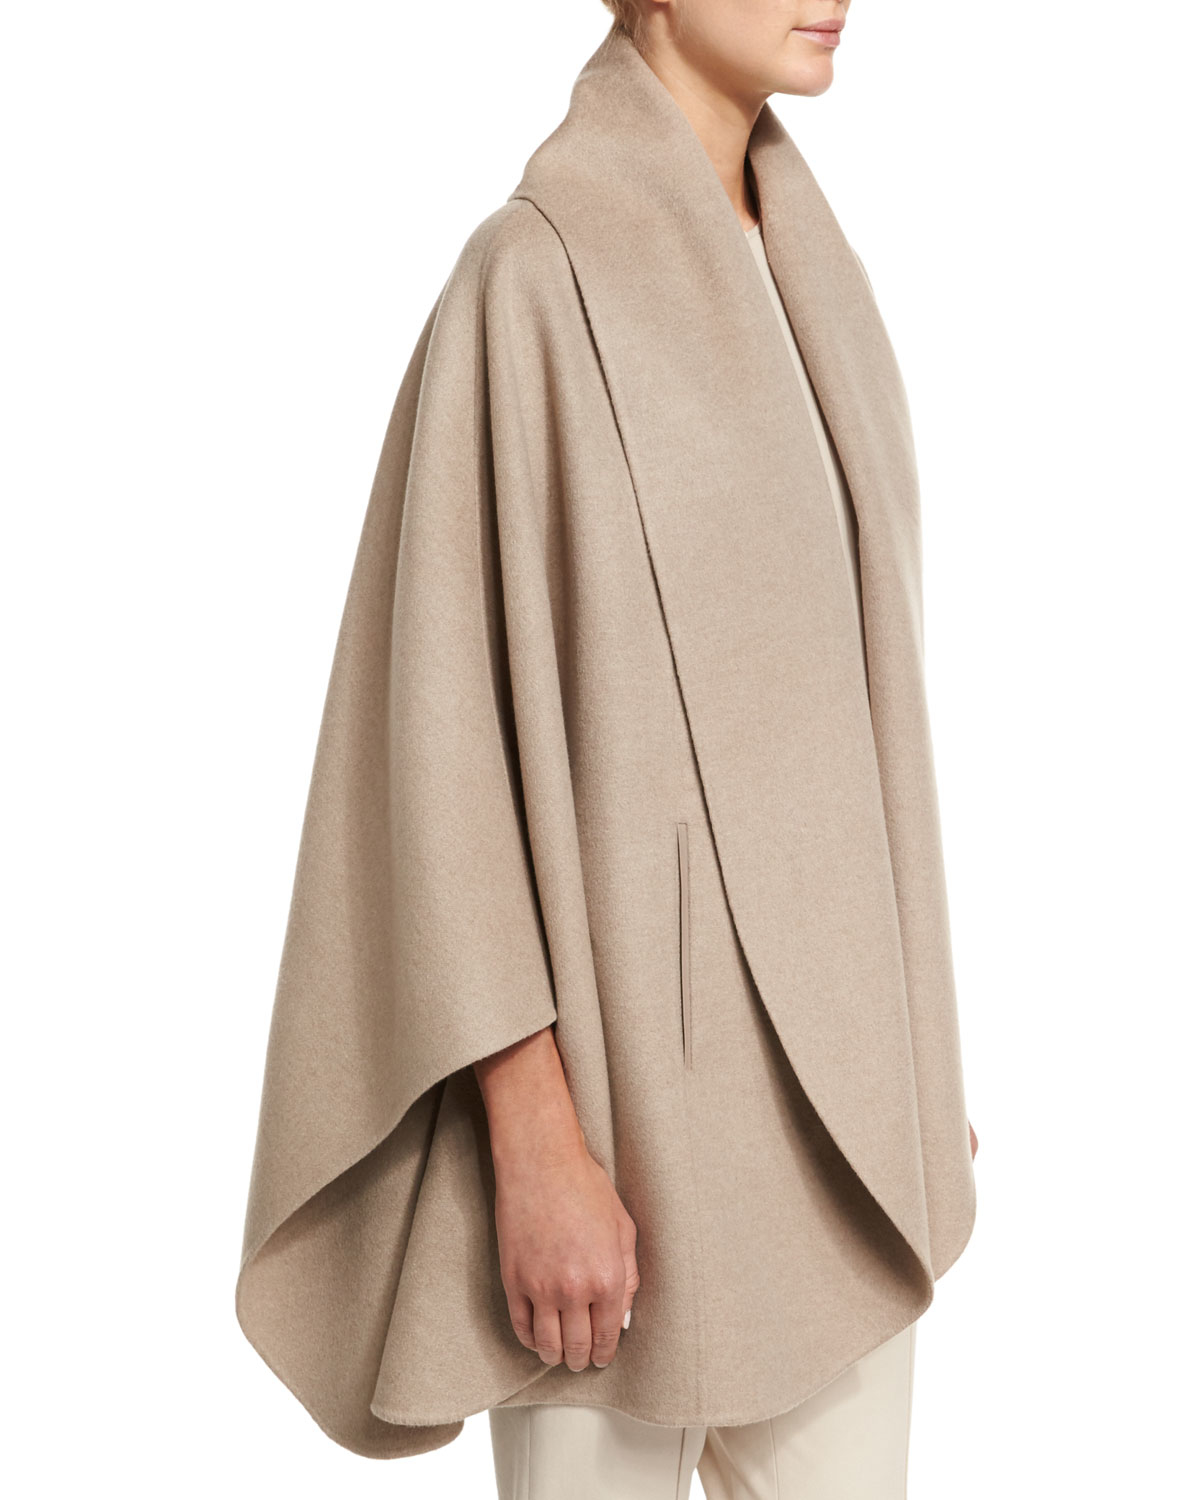 Lyst - Loro Piana Ledbury Belted Cashmere Cape in Natural